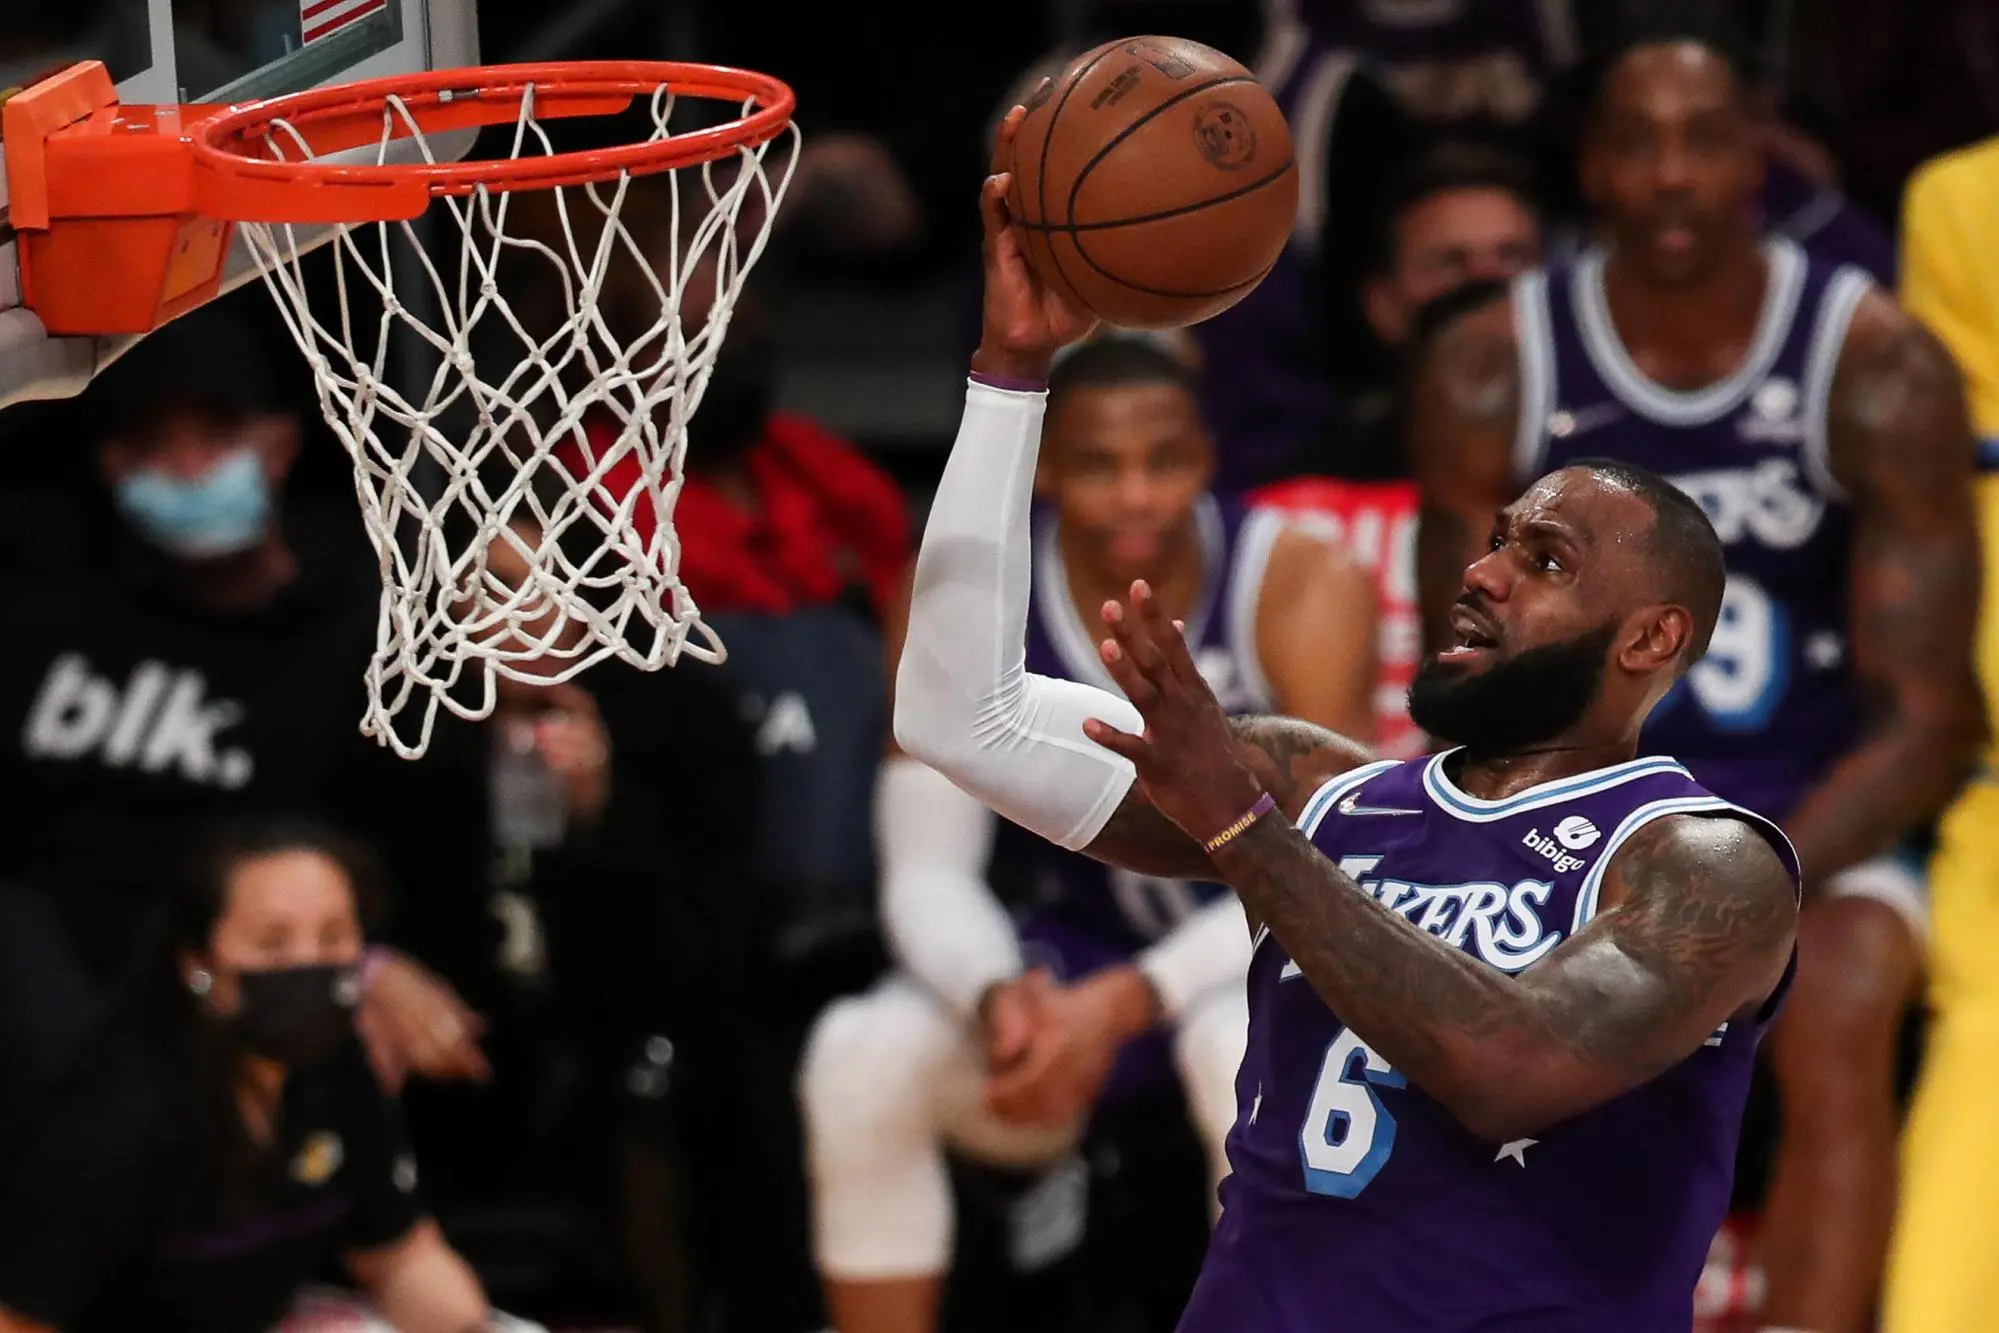 epa09655572 Los Angeles Lakers forward LeBron James drives to the basket during the first quarter of the NBA basketball game between the Los Angeles Lakers and San Antonio Spurs at the Staples Center in Los Angeles, California, USA, 23 December 2021. EPA/CAROLINE BREHMAN SHUTTERSTOCK OUT